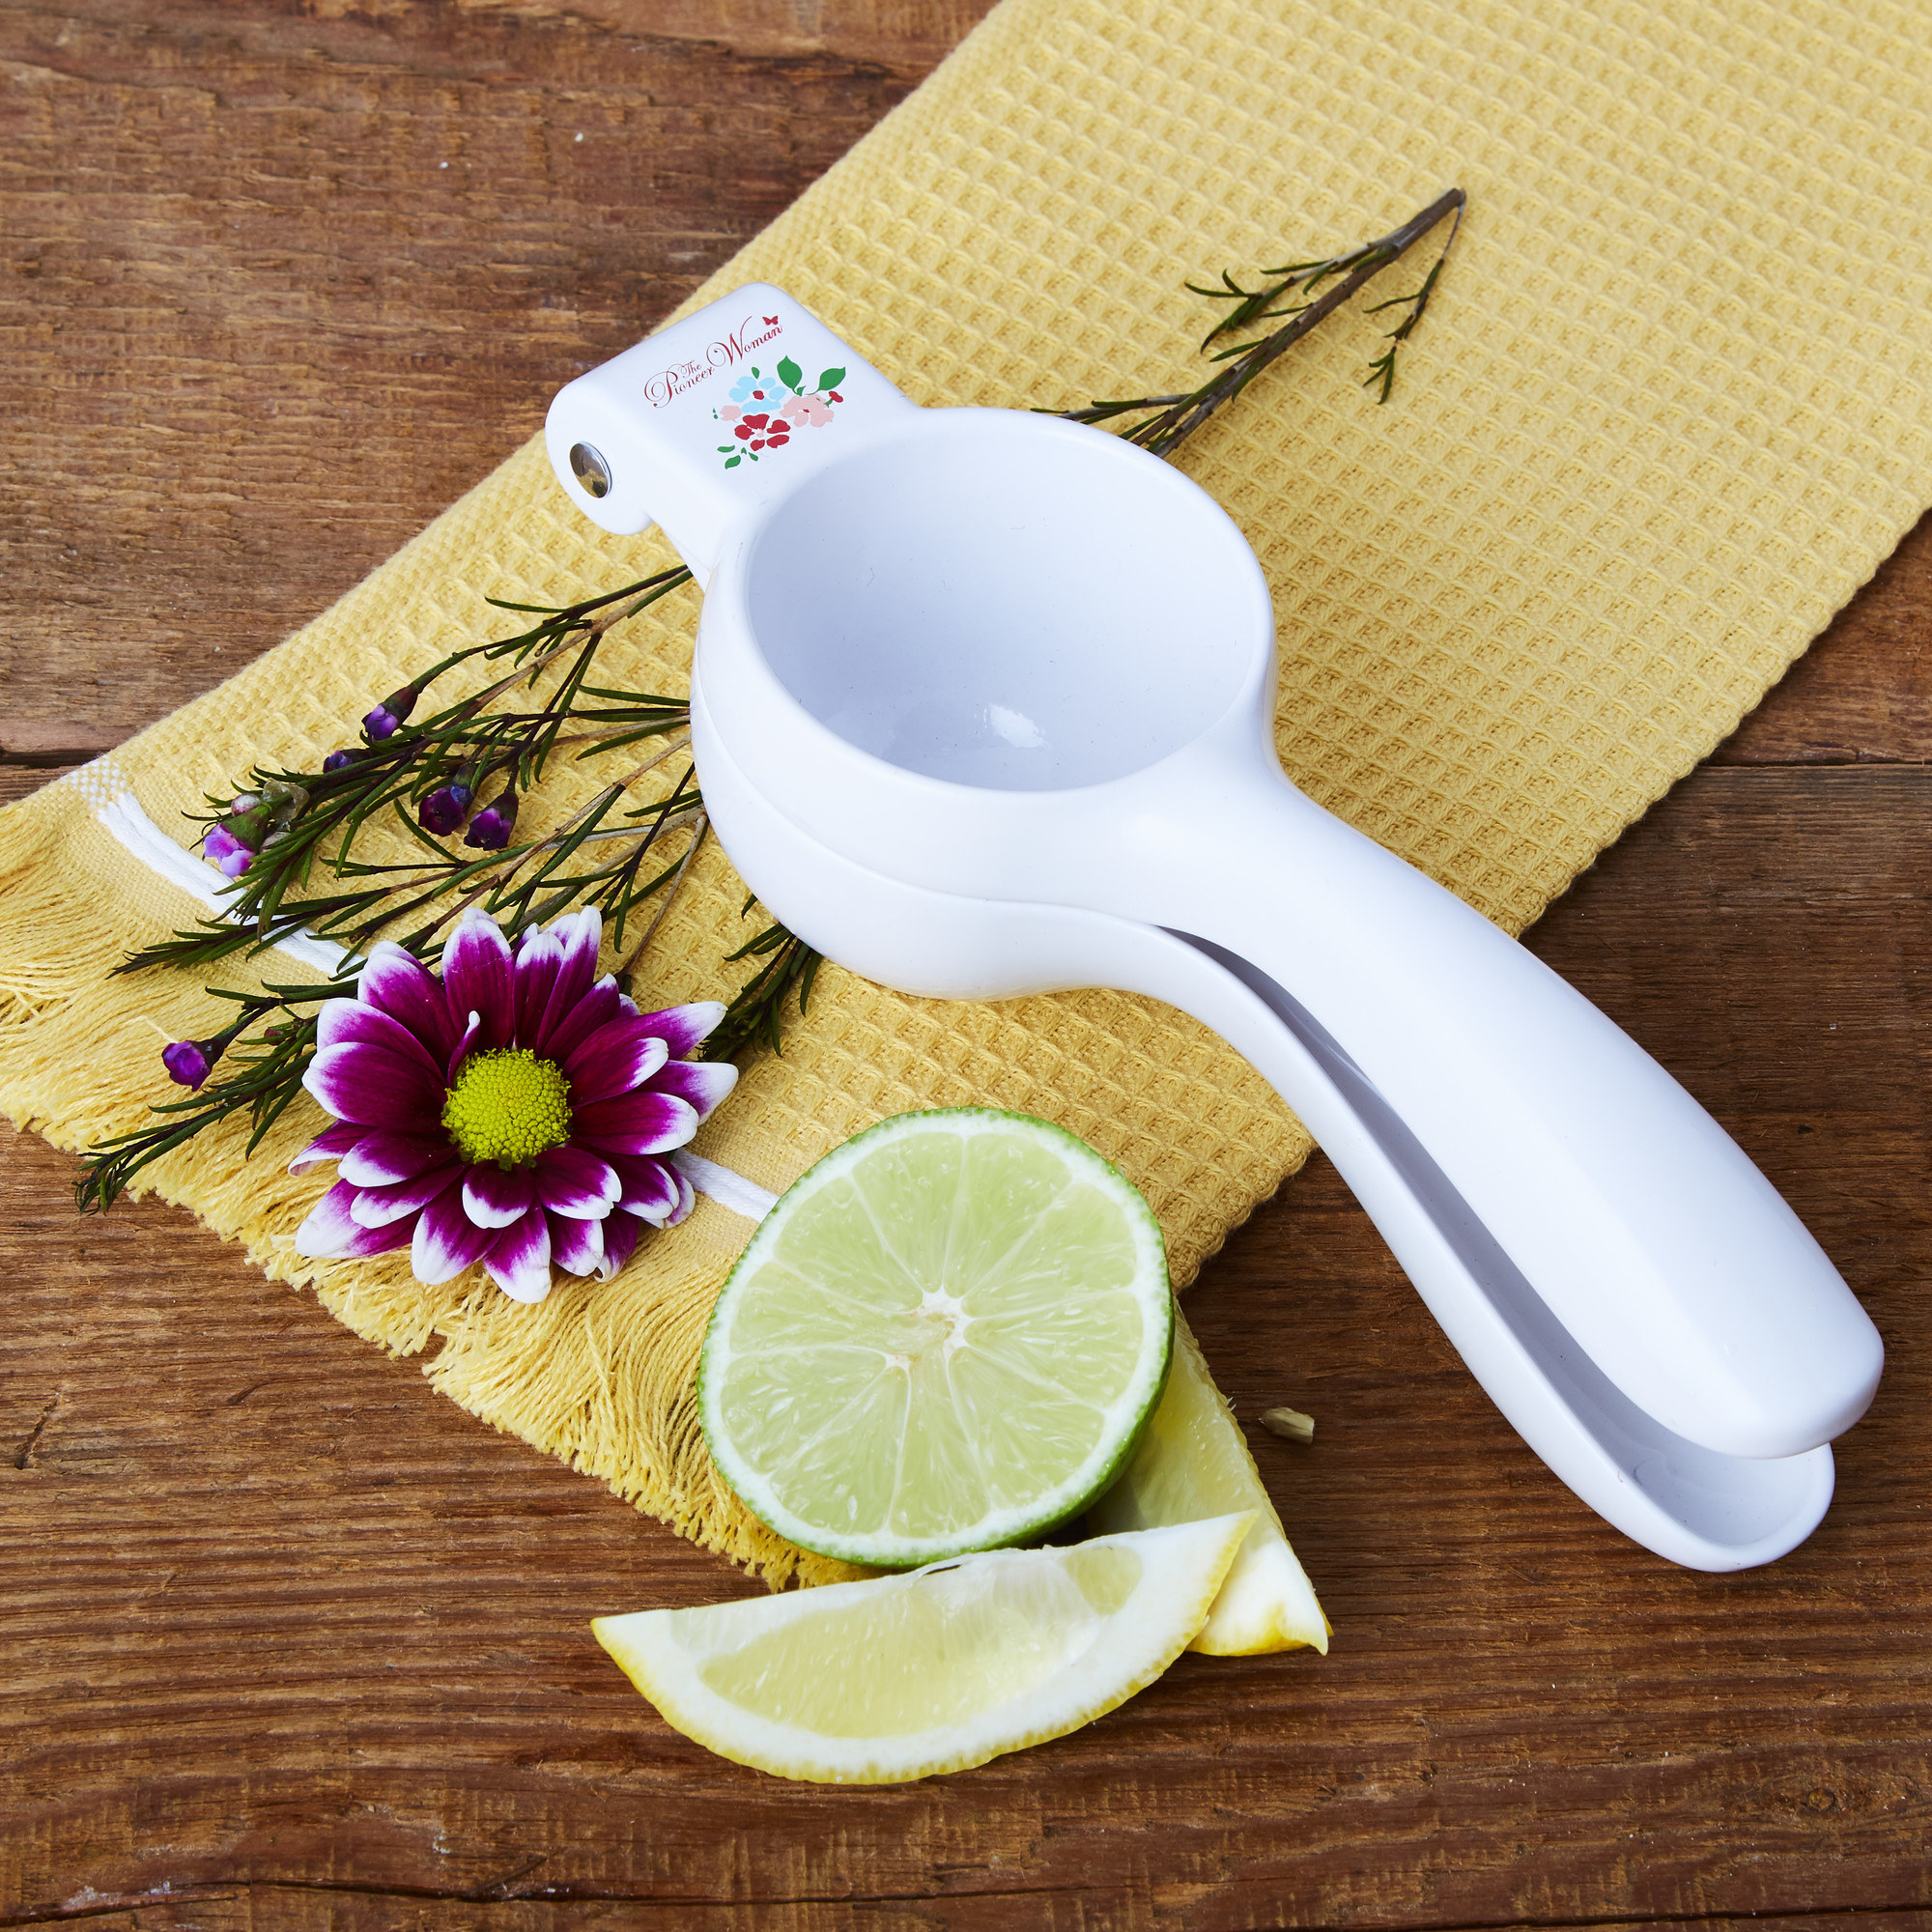 white handheld citrus juicer on a table next to a cut up lime